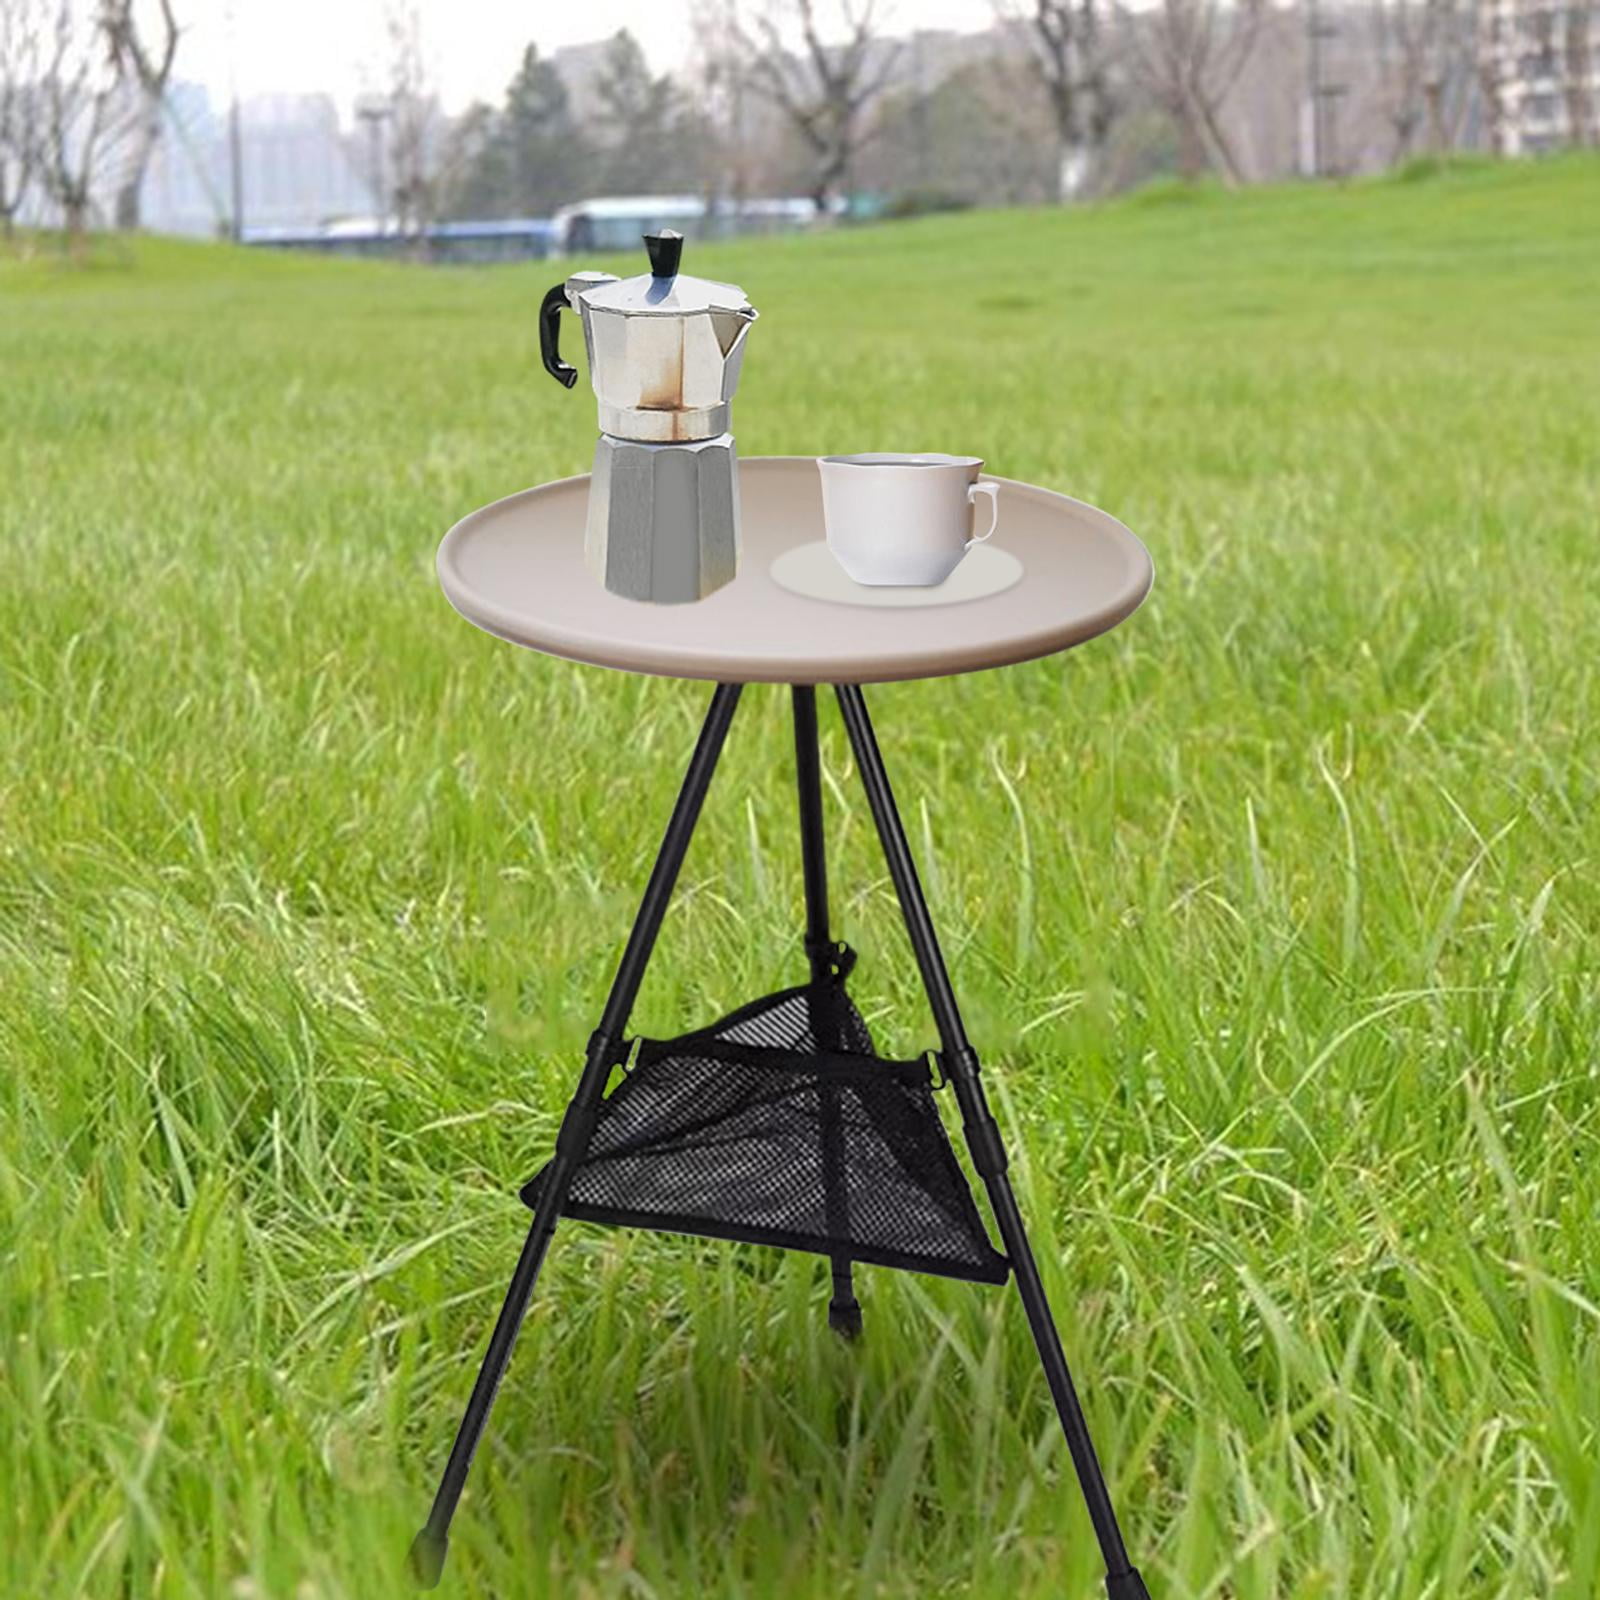 folding desk,Foldable Picnic Table Camping Folding Table,Outdoor Round Table  Small Tea Coffee Table,Lightweight Beach Table Patio Dining Side Table,Fishing  Tent Garden Table with Mesh Pocket 